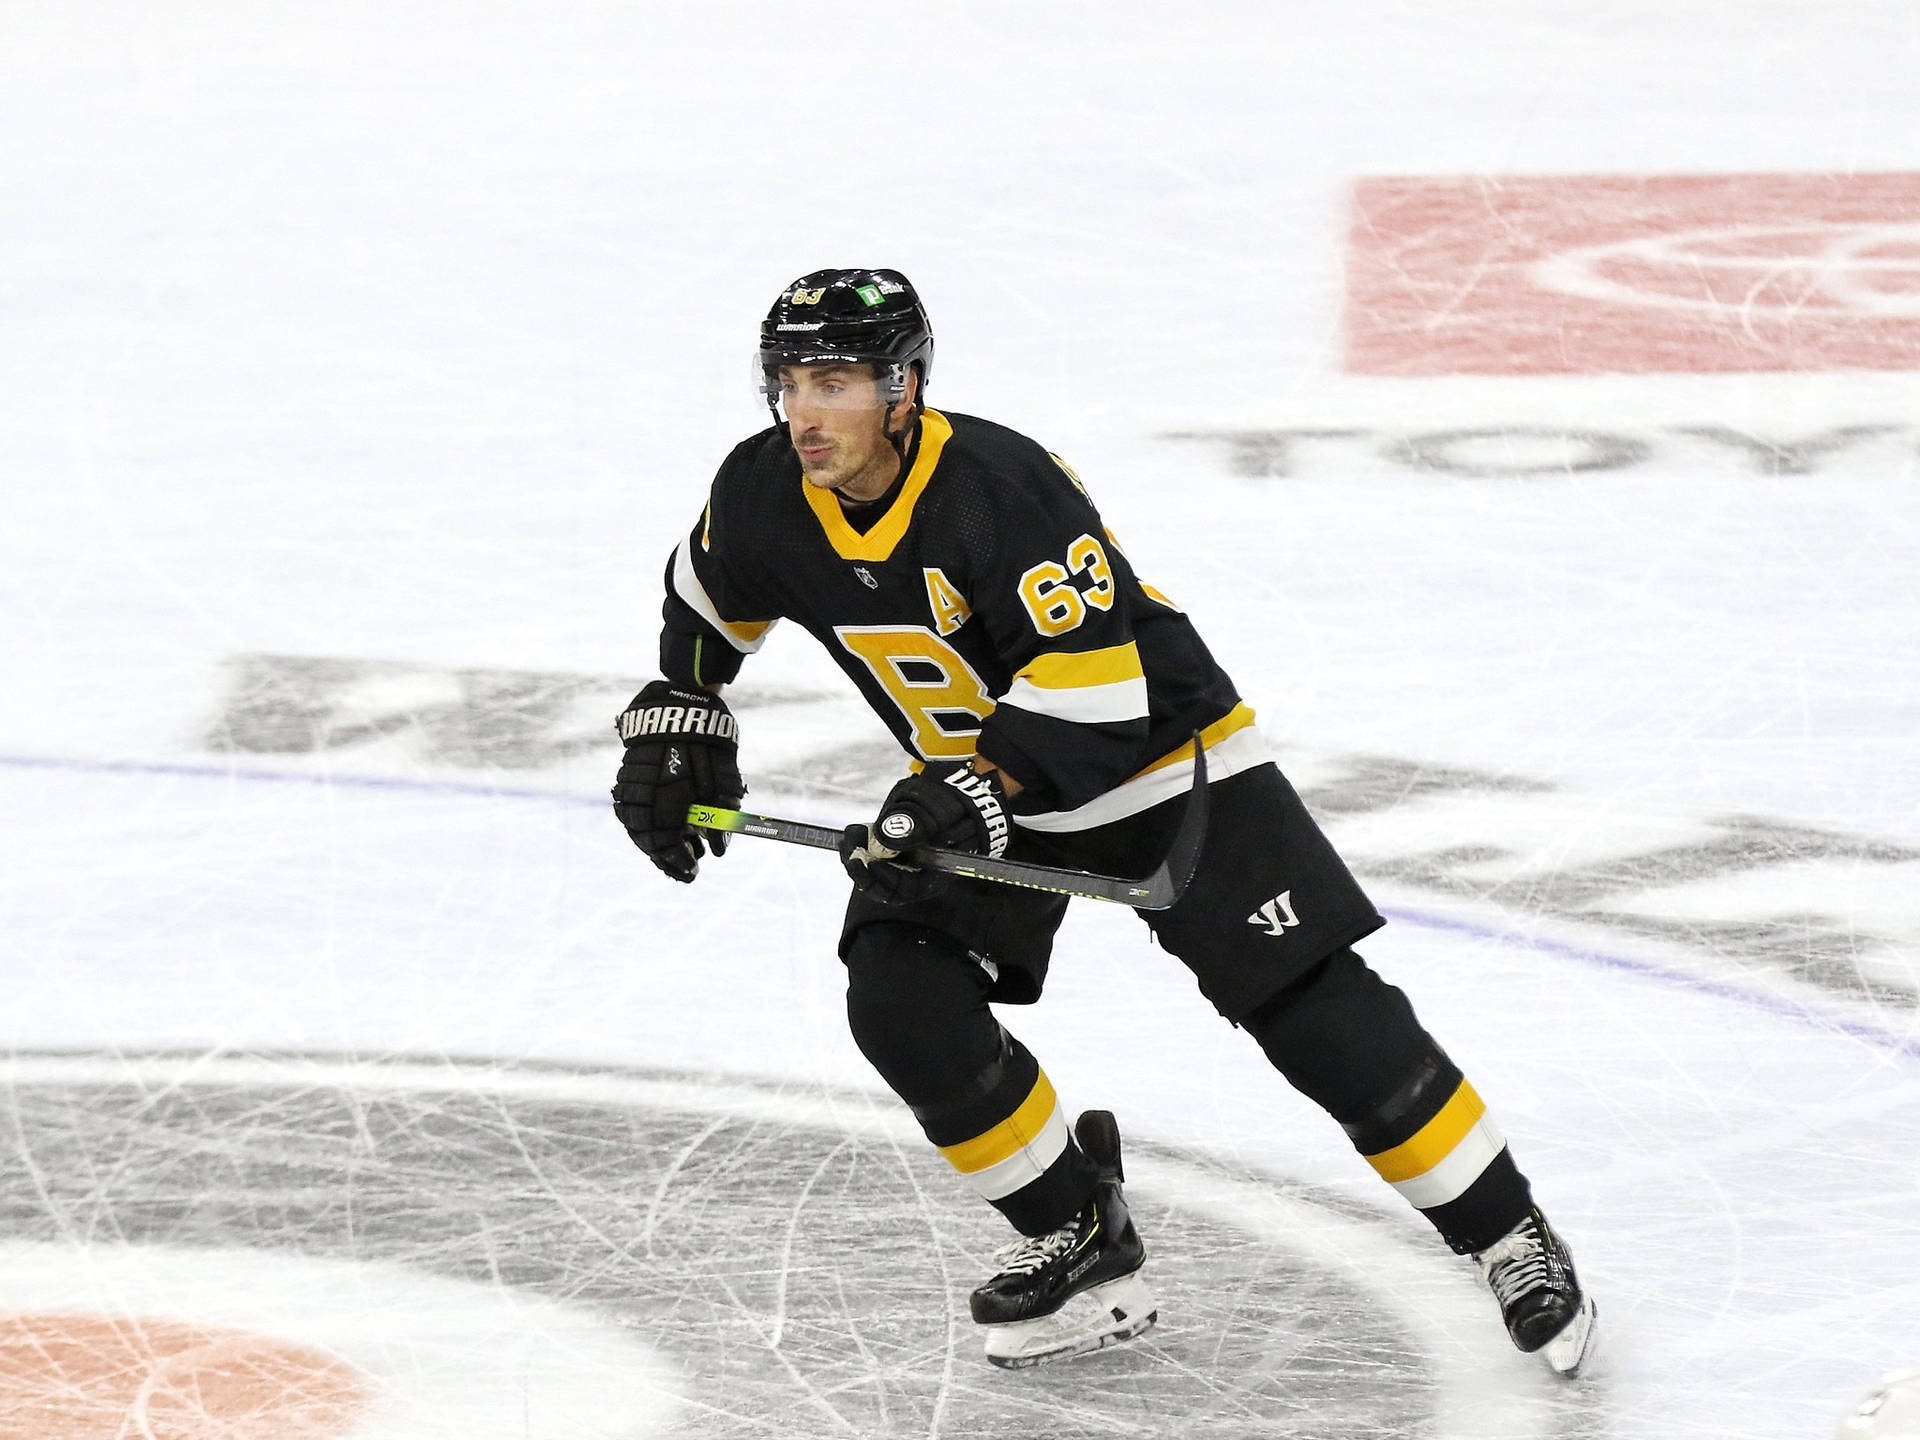 Boston Bruins' Star Player, Brad Marchand In Action